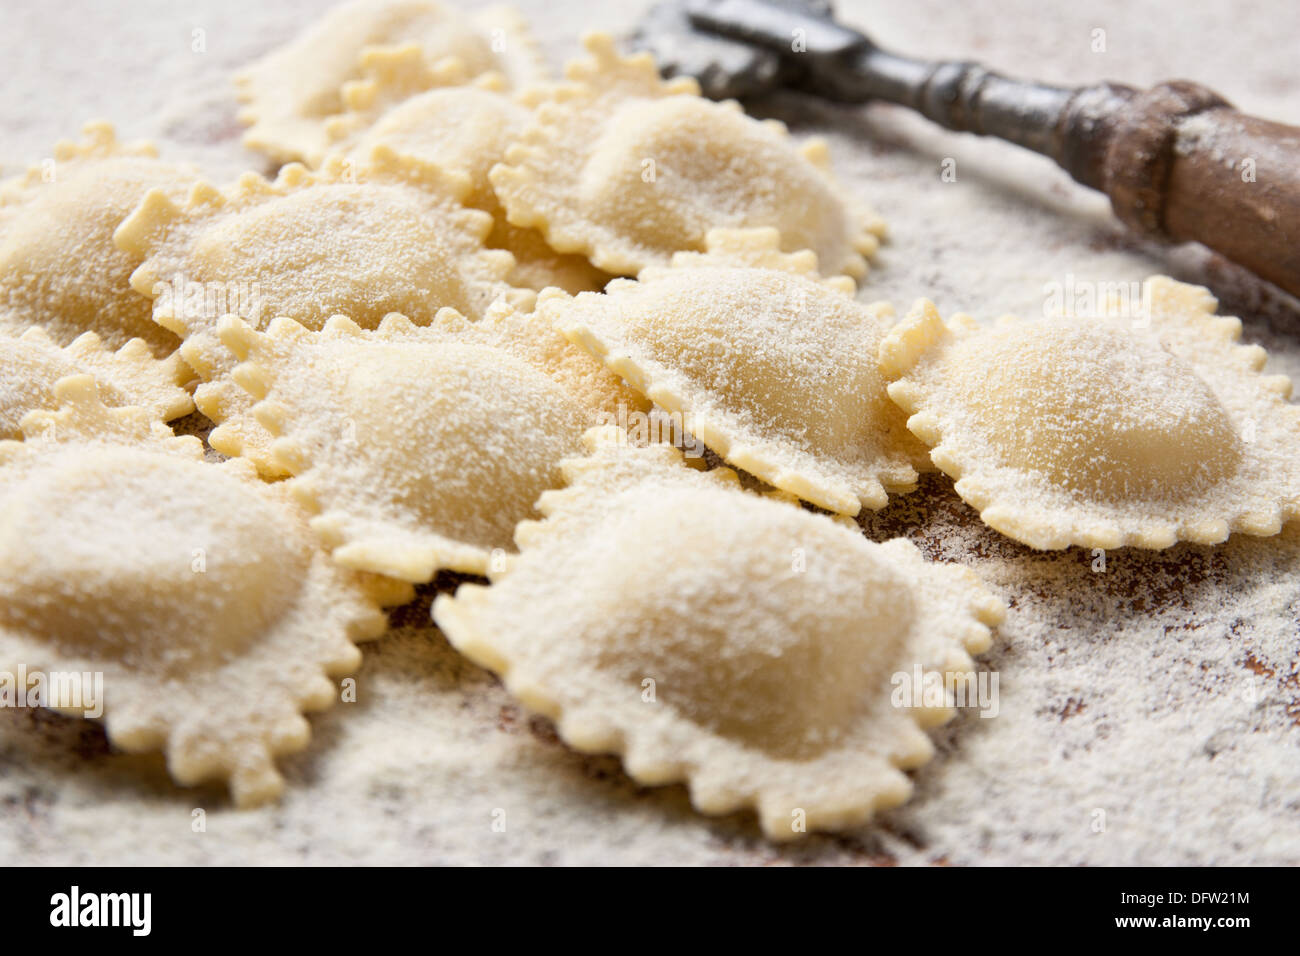 Making homemade ravioli with a wooden roller Stock Photo